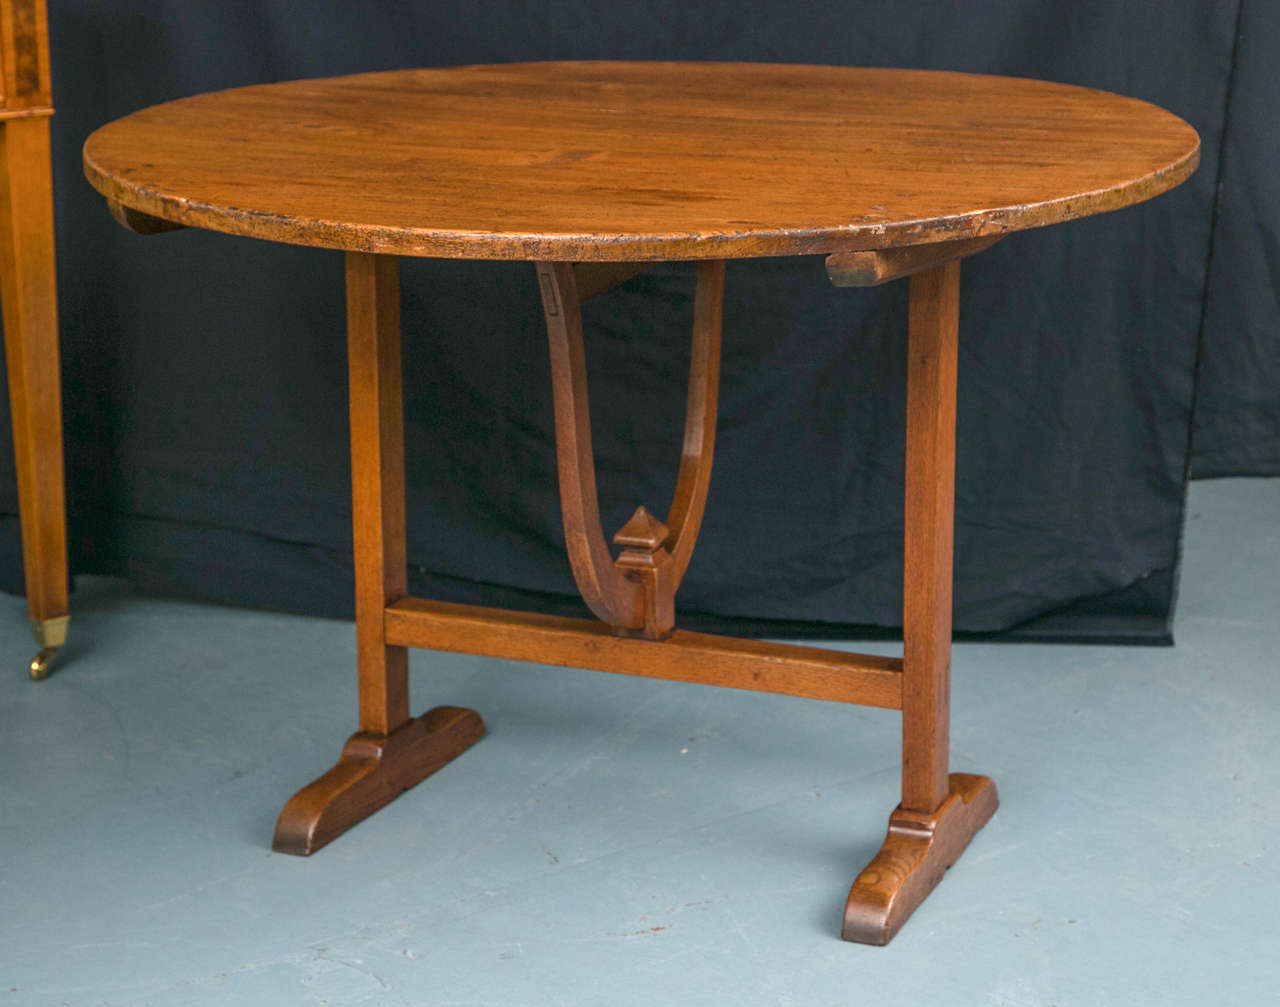 With its turned finial in the base, this tilt-top table has a bit of personality to augment its utilitarian roots. Wine tasting isn’t all just chamber music and linen jackets, its serious business when your livelihood depends on a discriminating